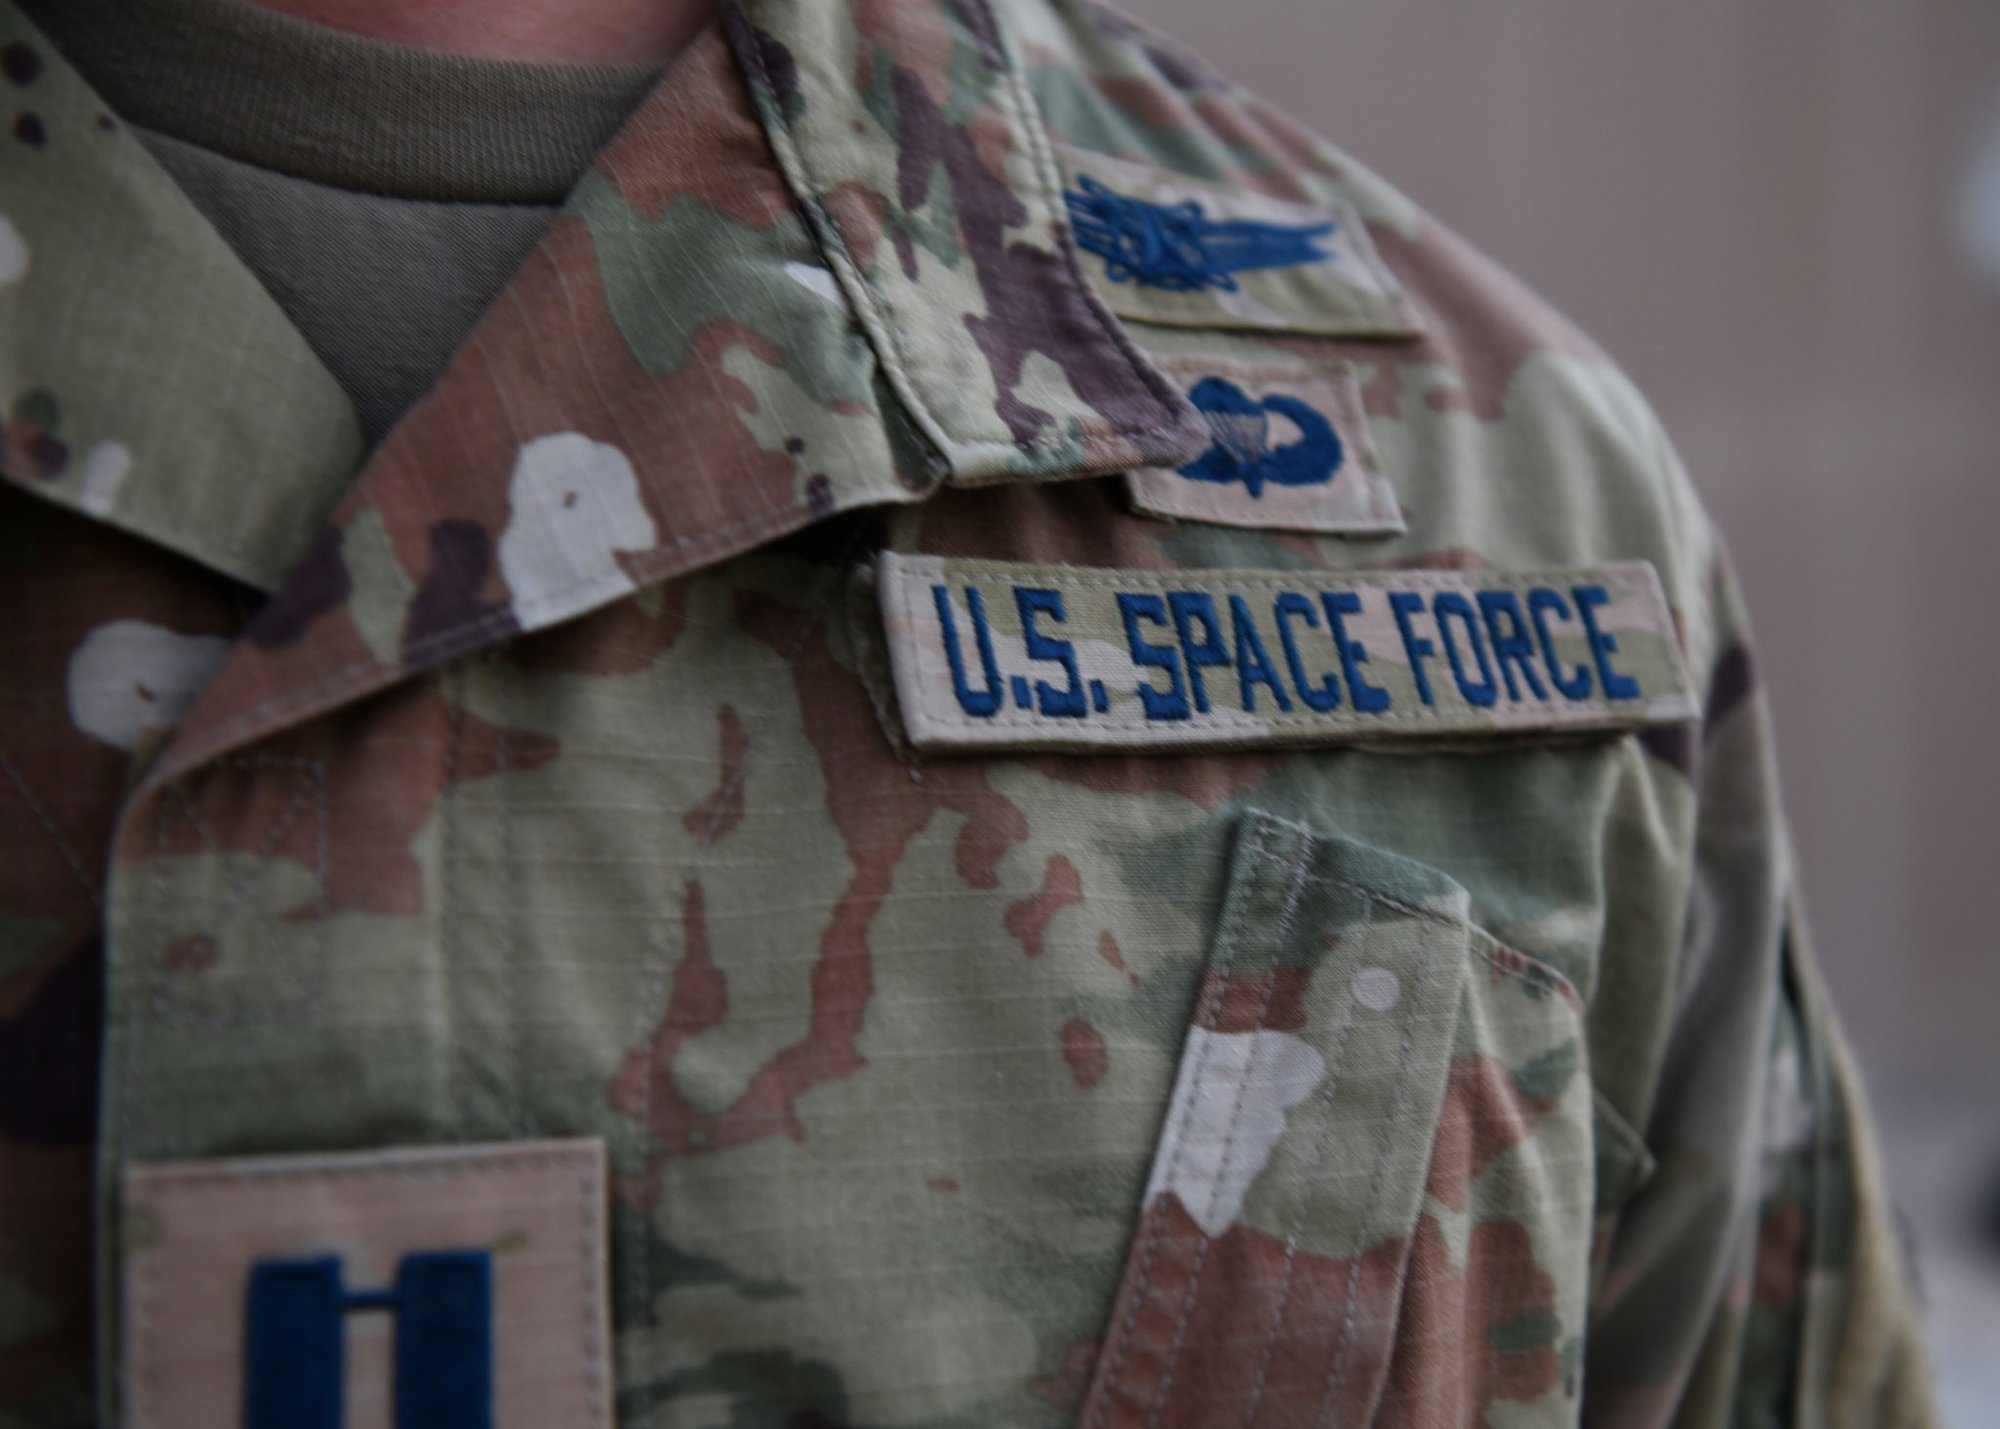 Capt. Ryan Vickers stands for a photo to display his new service tapes after taking his oath of office to transfer from the U.S. Air Force to the U.S. Space Force on Sept. 1, 2020, at Al Udeid Air Base, Qatar. The Space Force is the United States’ newest service in more than 70 years. US Air Force photo by Staff Sgt. Kayla White.